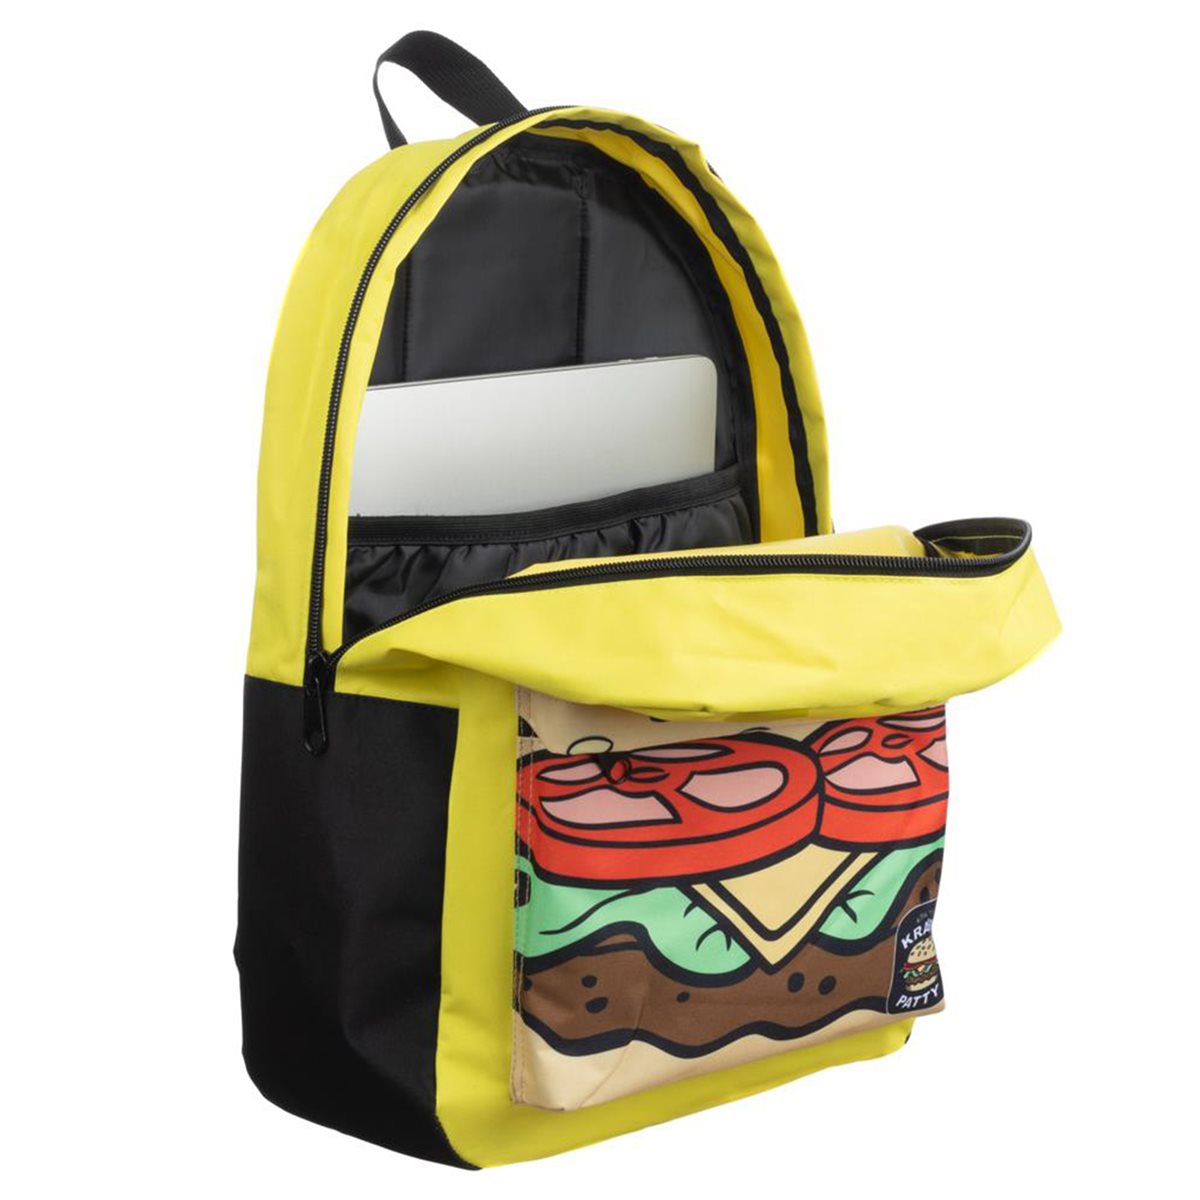 SpongeBob SquarePants Krabby Patty Backpack NEW WITH TAGS Licensed